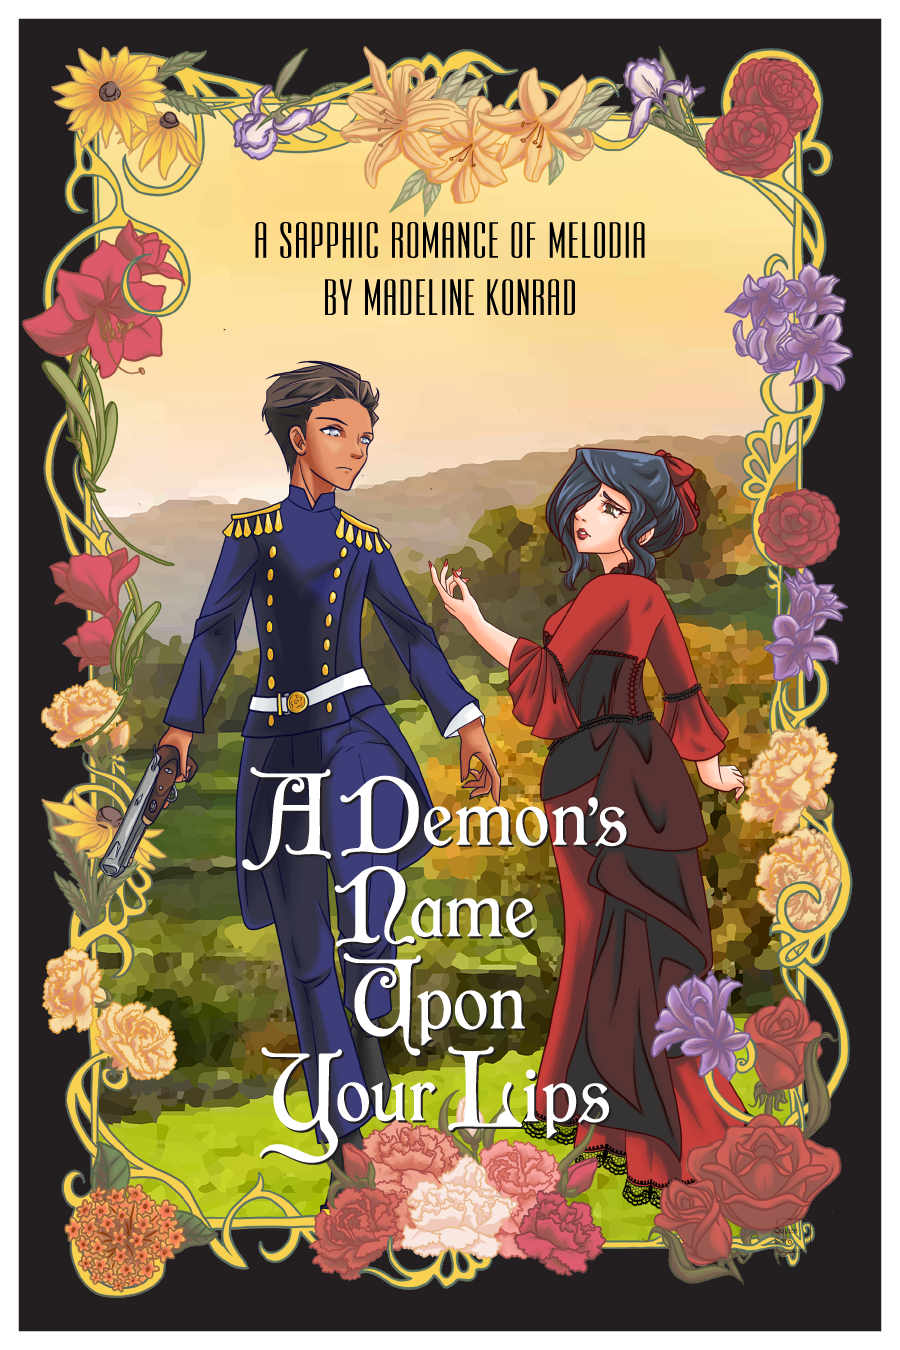 The cover of a book entitled A DEMON'S NAME UPON YOUR LIPS. At the top is the subtitle: A Sapphic Romance of Melodia, by Madeline Konrad. A woman in a red flowing corseted dress, on the right, looks longingly to another woman in blue military dress. The woman on the left holds an early nineteenth-century style dueling pistol and bears a hardened expression. Surrounding them is a border of various specific flowers.